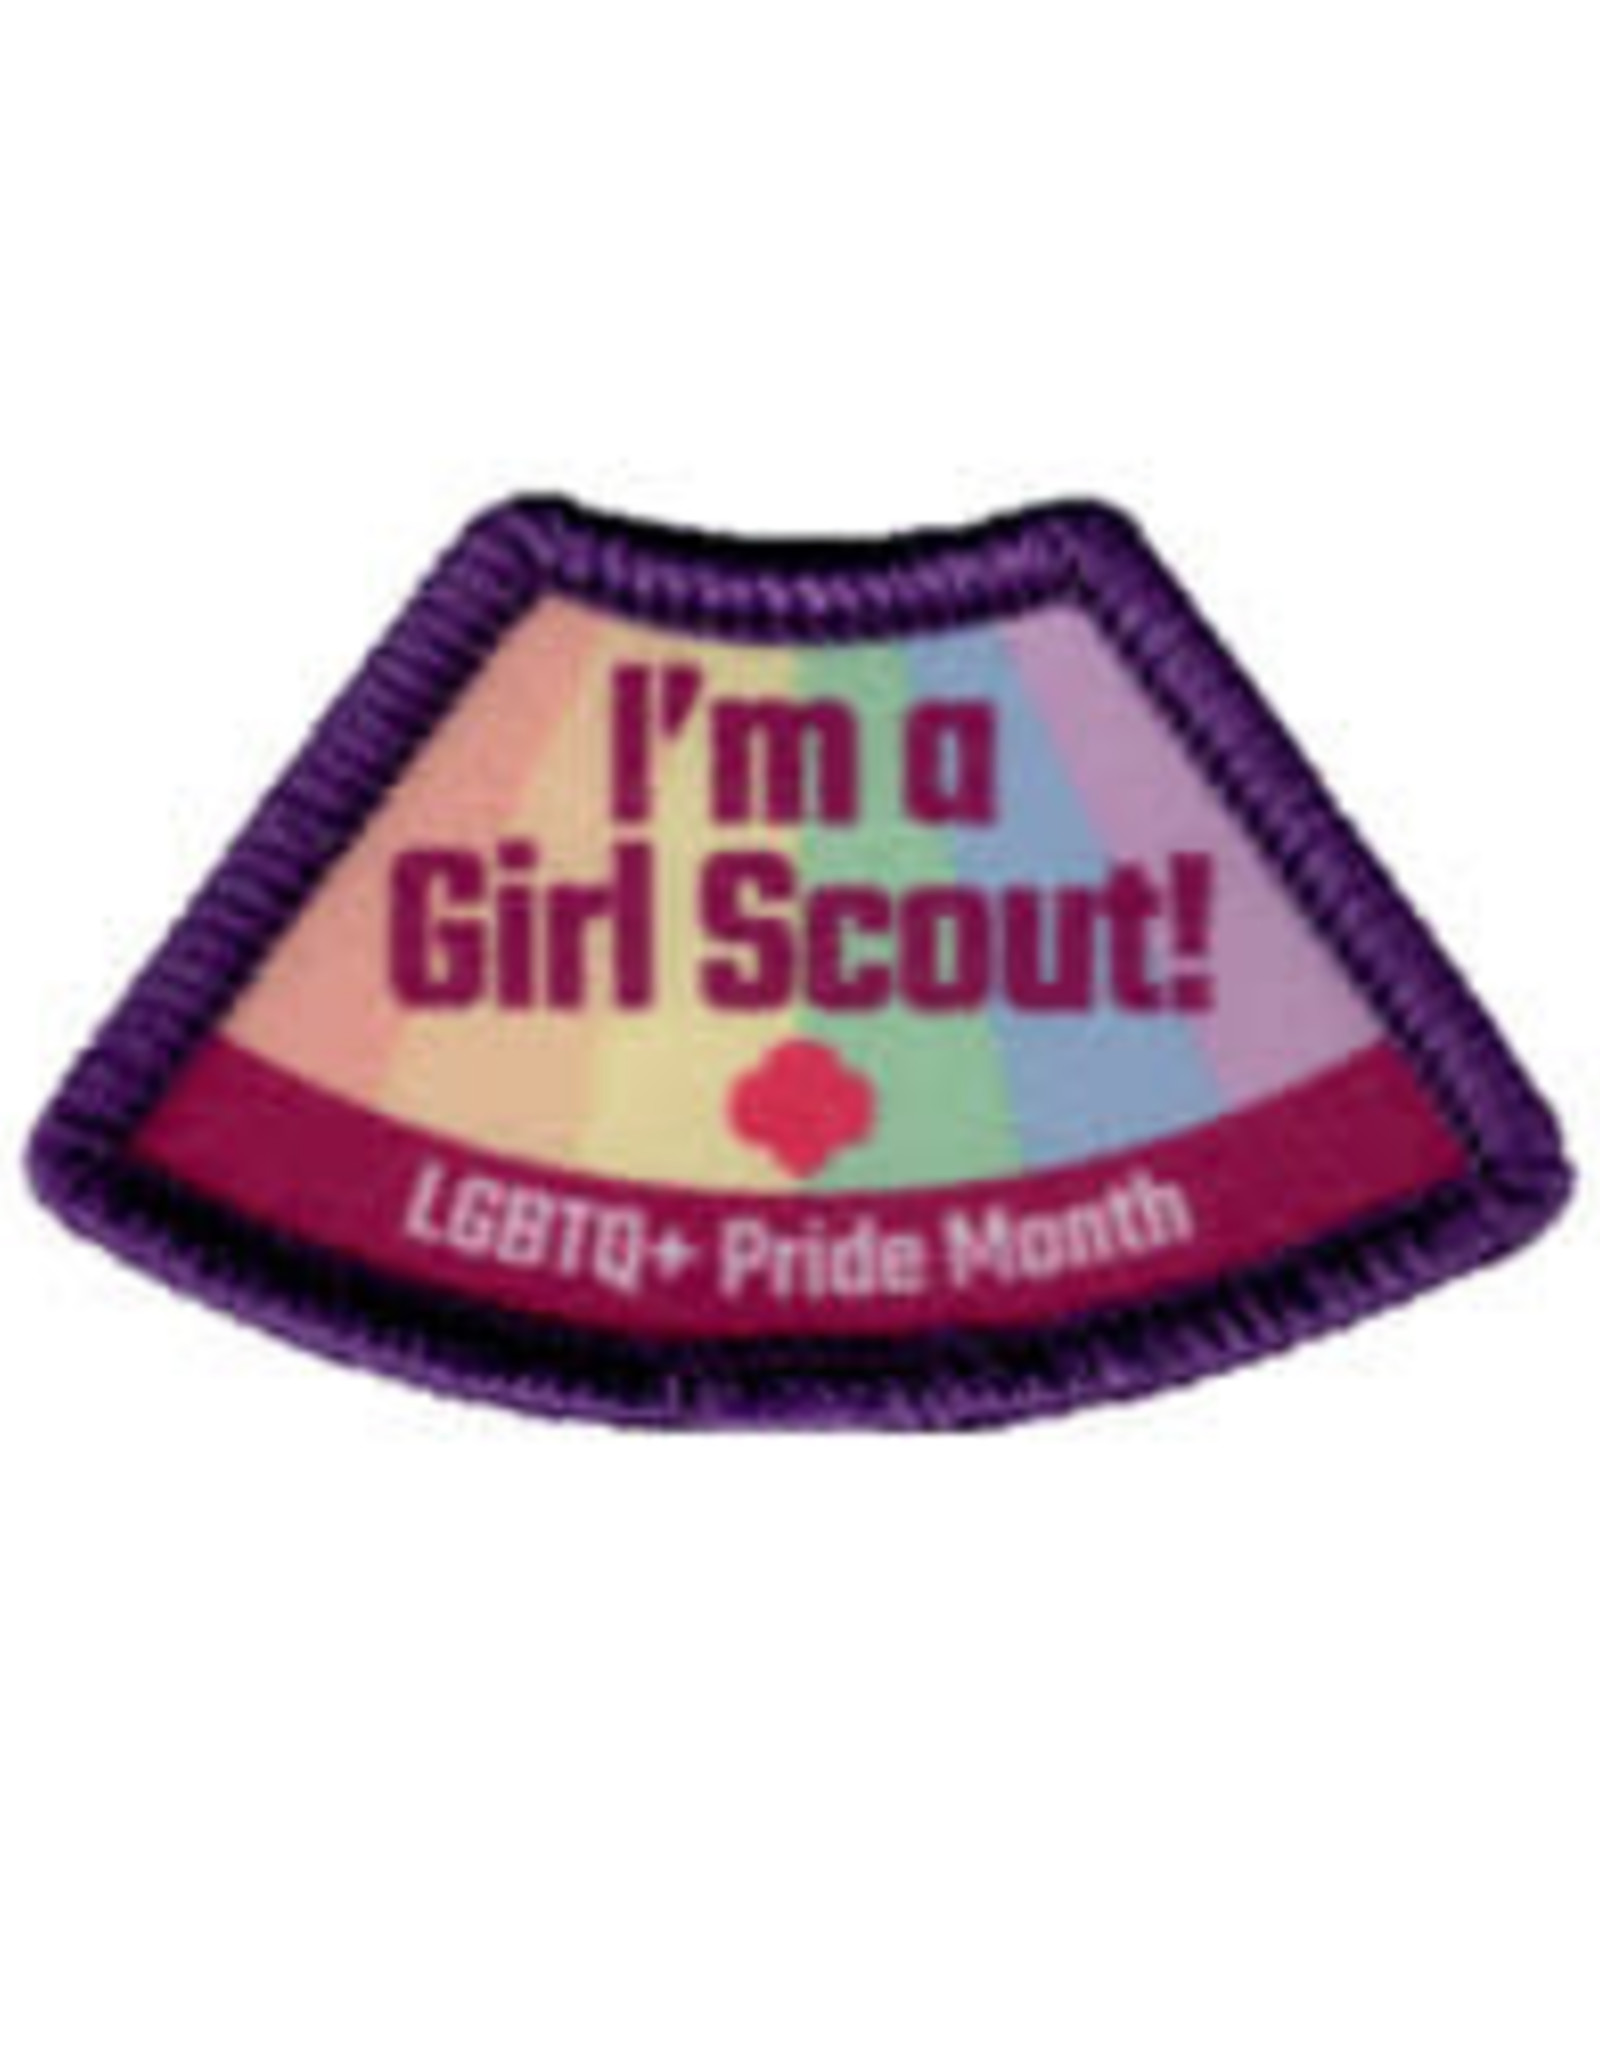 GSUSA Girl Scout LGBTQ+ Pride Month Sew On Patch